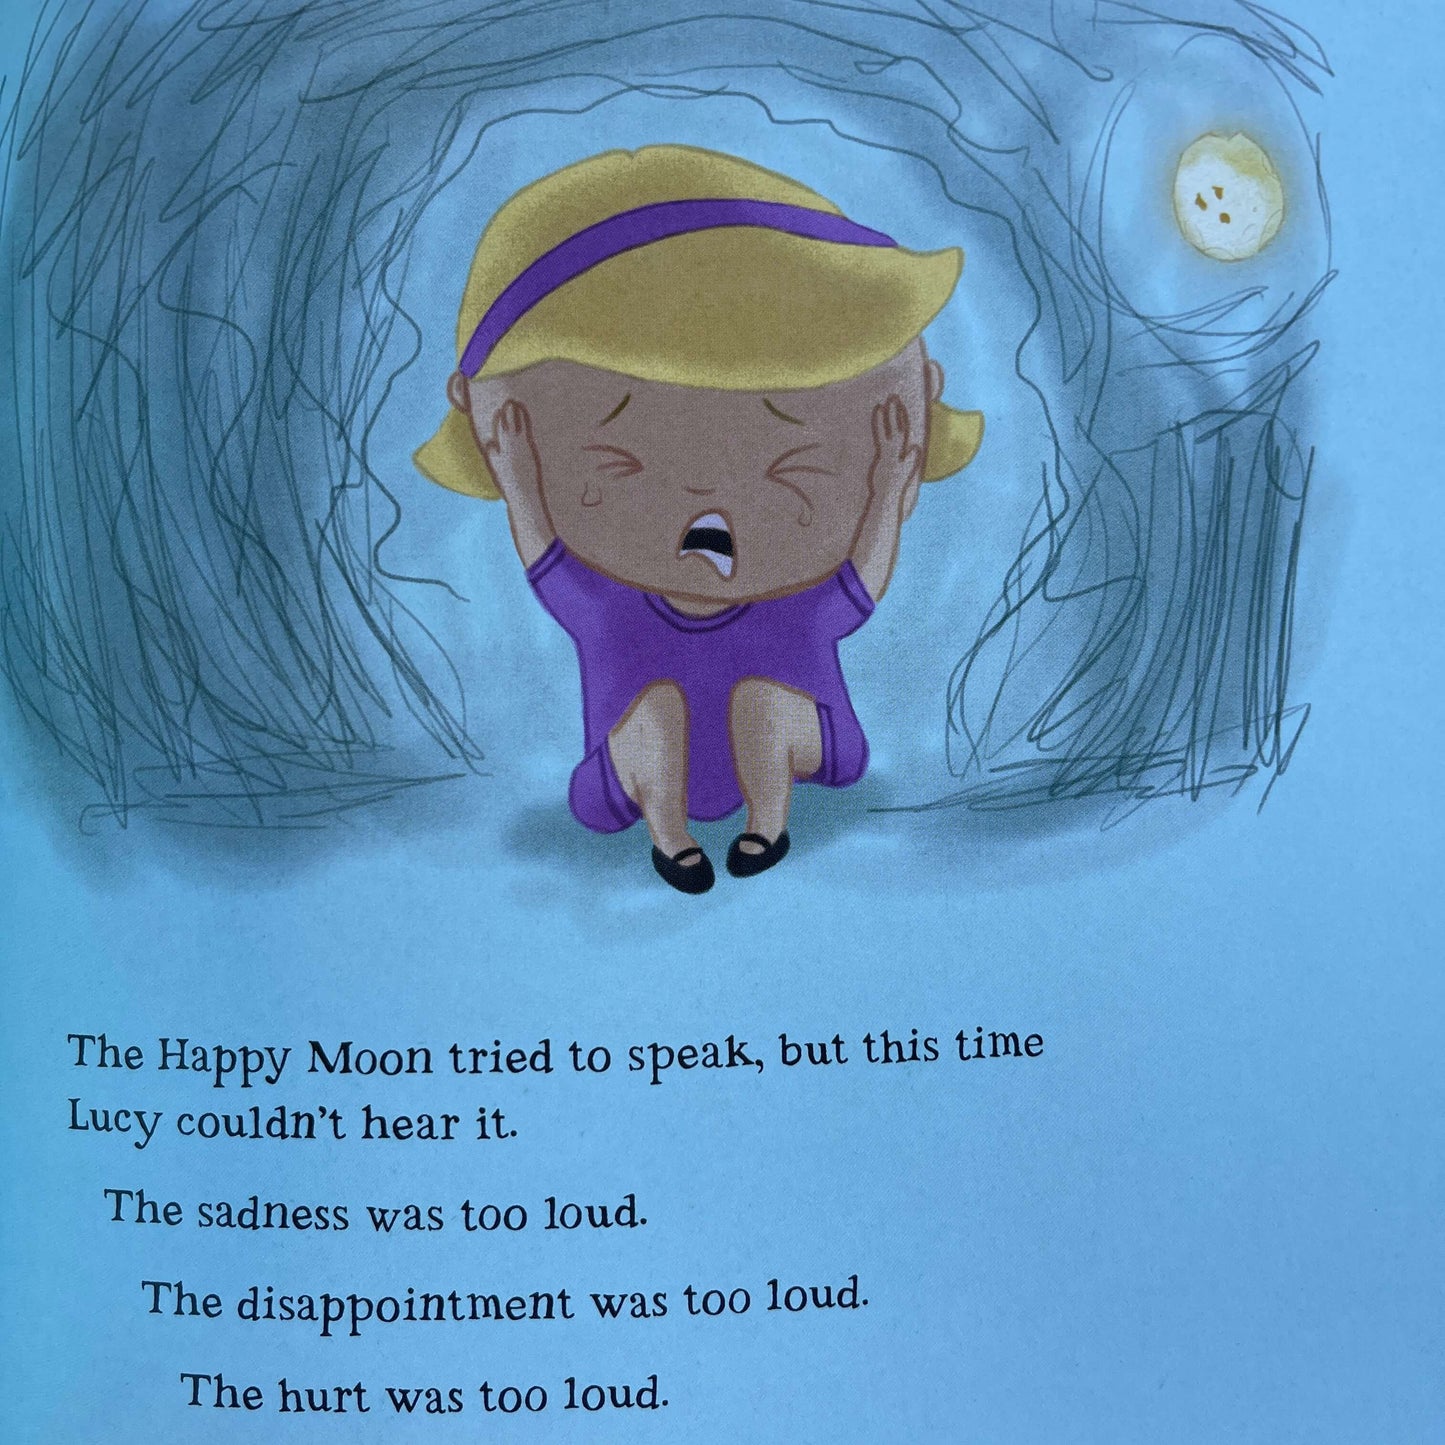 Page from Childrens book There's a Happy Moon in my Side by Richard Black.